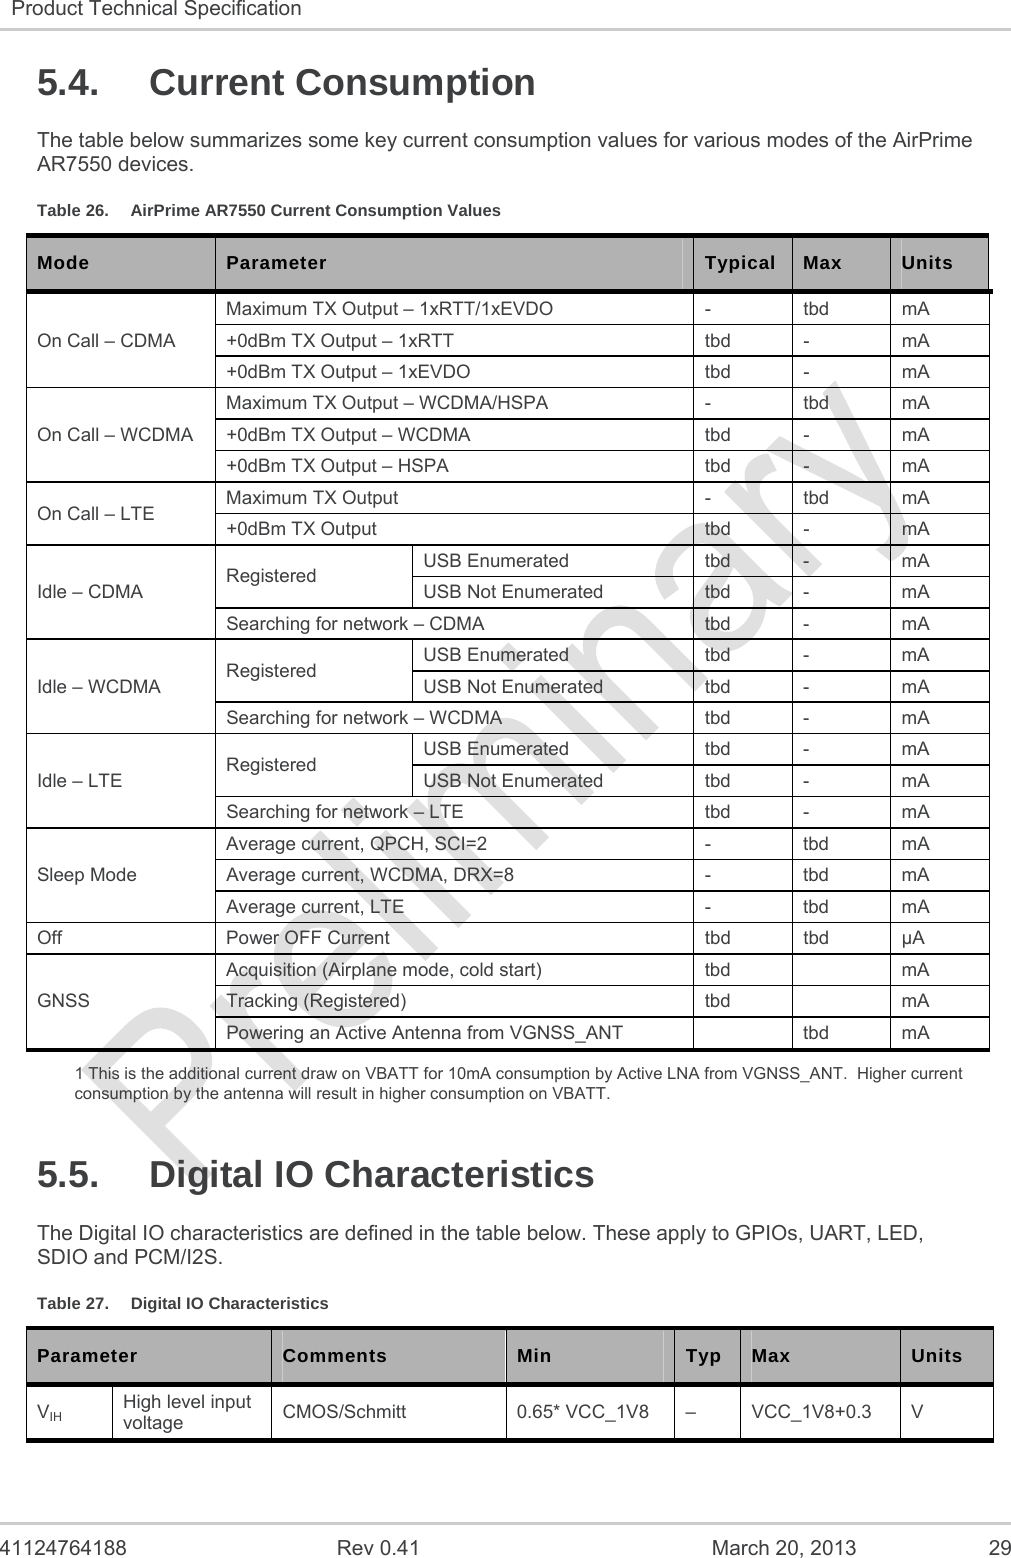   41124764188  Rev 0.41  March 20, 2013  29 Product Technical Specification   5.4. Current Consumption The table below summarizes some key current consumption values for various modes of the AirPrime AR7550 devices. Table 26.  AirPrime AR7550 Current Consumption Values Mode  Parameter  Typical  Max   Units On Call – CDMA Maximum TX Output – 1xRTT/1xEVDO  -   tbd  mA  +0dBm TX Output – 1xRTT  tbd  -   mA  +0dBm TX Output – 1xEVDO  tbd  -  mA On Call – WCDMA Maximum TX Output – WCDMA/HSPA  -   tbd  mA  +0dBm TX Output – WCDMA  tbd  -   mA  +0dBm TX Output – HSPA  tbd  -  mA On Call – LTE  Maximum TX Output  -   tbd  mA  +0dBm TX Output  tbd  -   mA  Idle – CDMA  Registered   USB Enumerated  tbd  -   mA  USB Not Enumerated  tbd  -  mA Searching for network – CDMA  tbd  -   mA  Idle – WCDMA  Registered   USB Enumerated  tbd  -  mA USB Not Enumerated  tbd  -   mA  Searching for network – WCDMA  tbd  -   mA  Idle – LTE  Registered   USB Enumerated  tbd  -  mA USB Not Enumerated  tbd  -   mA  Searching for network – LTE  tbd  -   mA  Sleep Mode Average current, QPCH, SCI=2   -   tbd   mA  Average current, WCDMA, DRX=8  -   tbd   mA  Average current, LTE  -   tbd   mA  Off   Power OFF Current  tbd  tbd  A GNSS Acquisition (Airplane mode, cold start)  tbd    mA Tracking (Registered)  tbd    mA Powering an Active Antenna from VGNSS_ANT    tbd  mA 1 This is the additional current draw on VBATT for 10mA consumption by Active LNA from VGNSS_ANT.  Higher current consumption by the antenna will result in higher consumption on VBATT. 5.5. Digital IO Characteristics The Digital IO characteristics are defined in the table below. These apply to GPIOs, UART, LED, SDIO and PCM/I2S. Table 27.  Digital IO Characteristics Parameter  Comments  Min  Typ  Max   Units VIH High level input voltage   CMOS/Schmitt 0.65* VCC_1V8 – VCC_1V8+0.3 V 